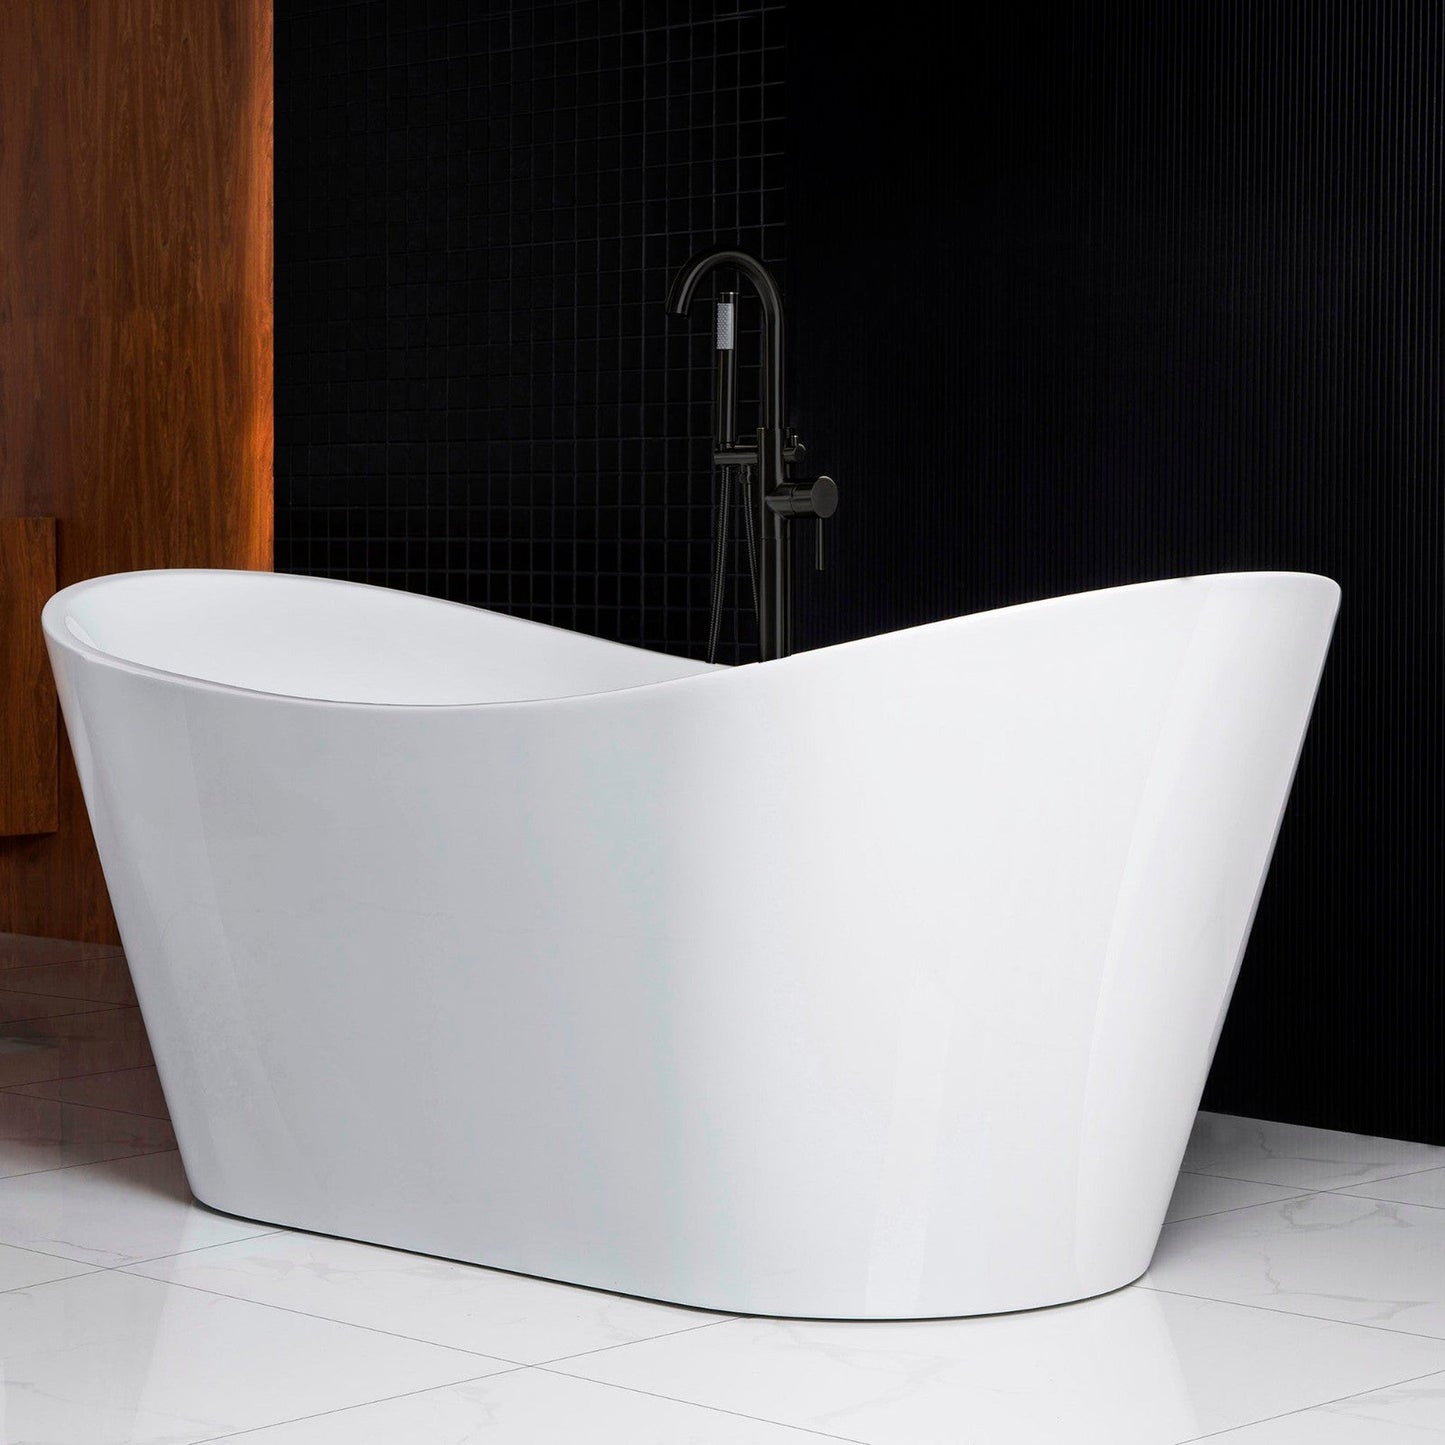 WoodBridge B0010 67" White Acrylic Freestanding Contemporary Soaking Bathtub With Matte Black Drain, Overflow, F0025MBSQ Tub Filler and Caddy Tray